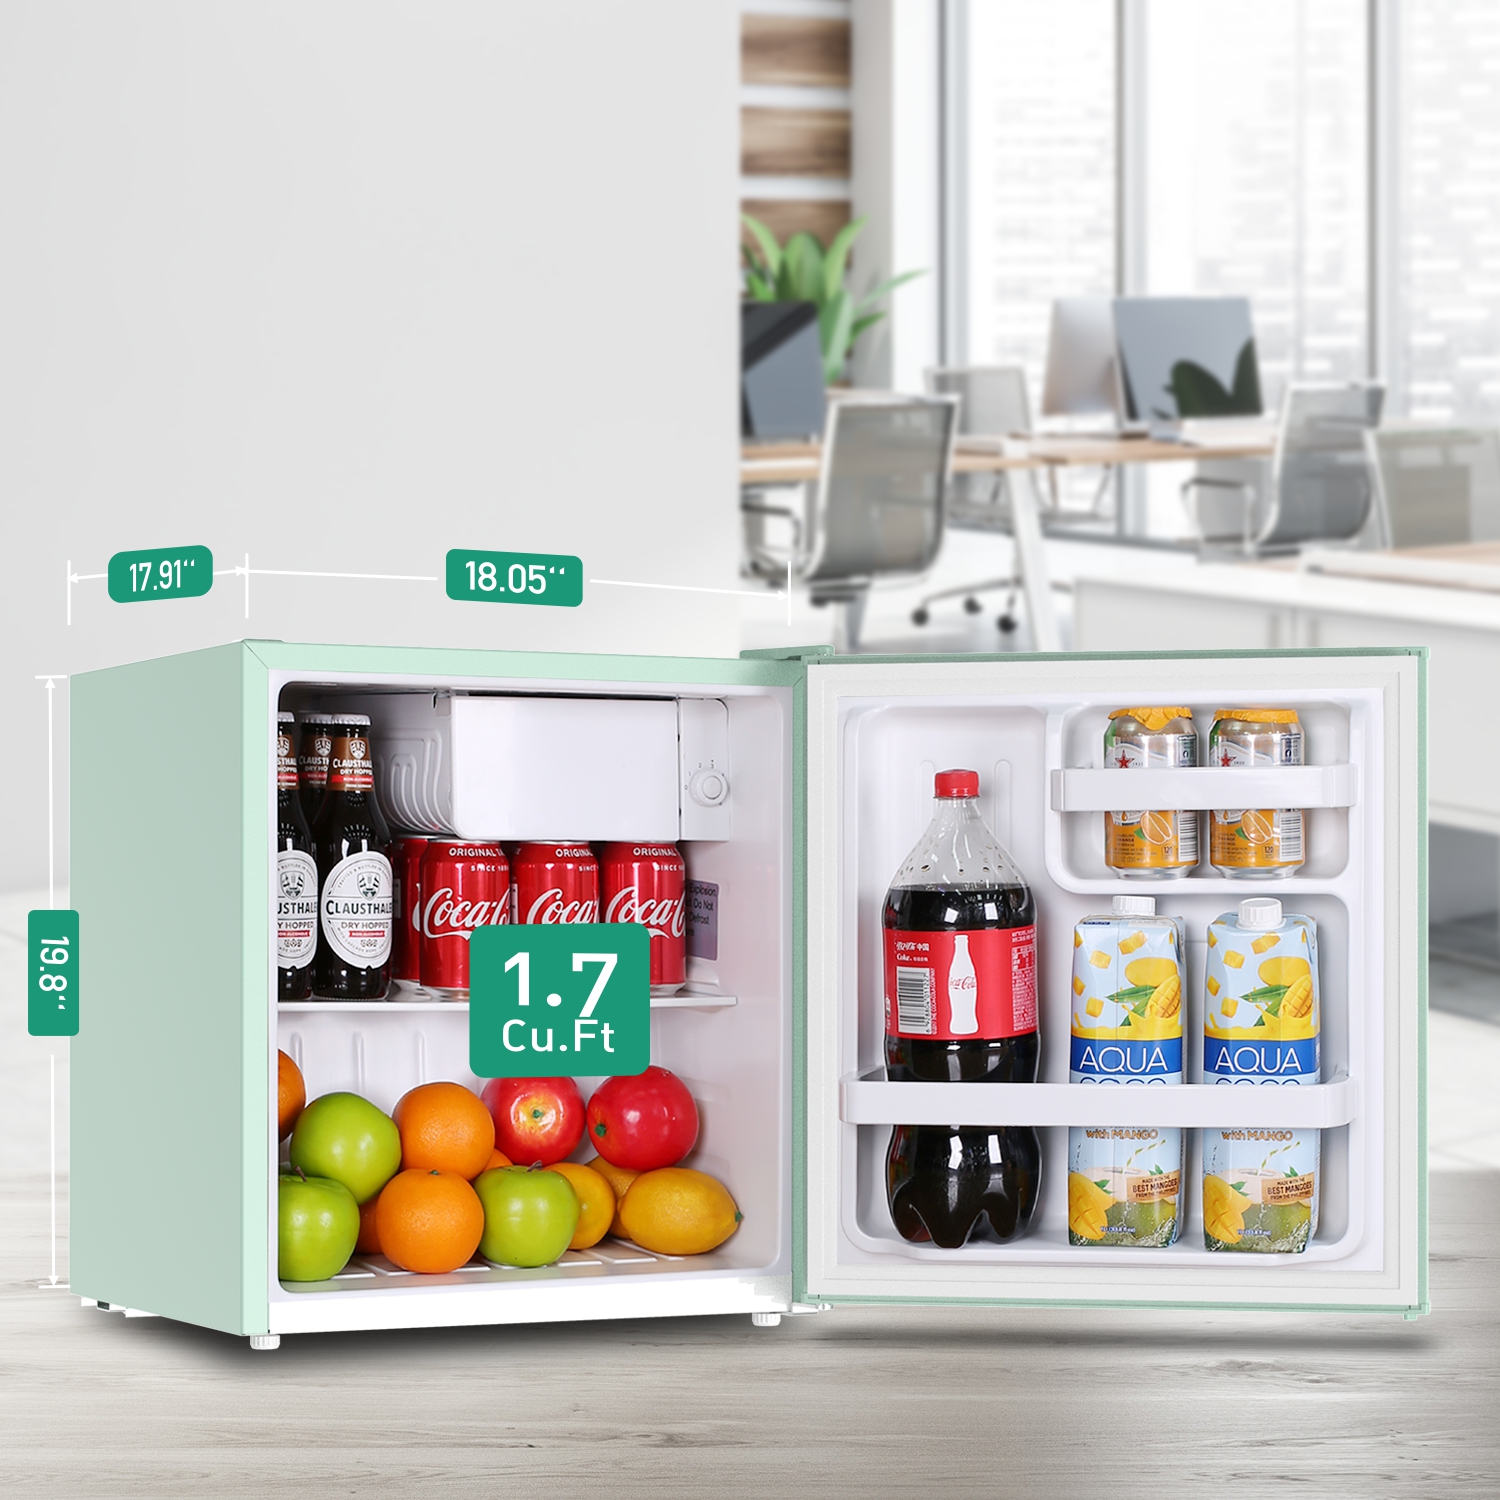 Mini Fridge with Freezer. 1.7 Cu.Ft Small Refrigerator, 6 Adjustable  Thermostat Control, One-Touch Defrost, Reversible Doors Design,  Dorm/Office/Home Refrigerator, Green With Handle 